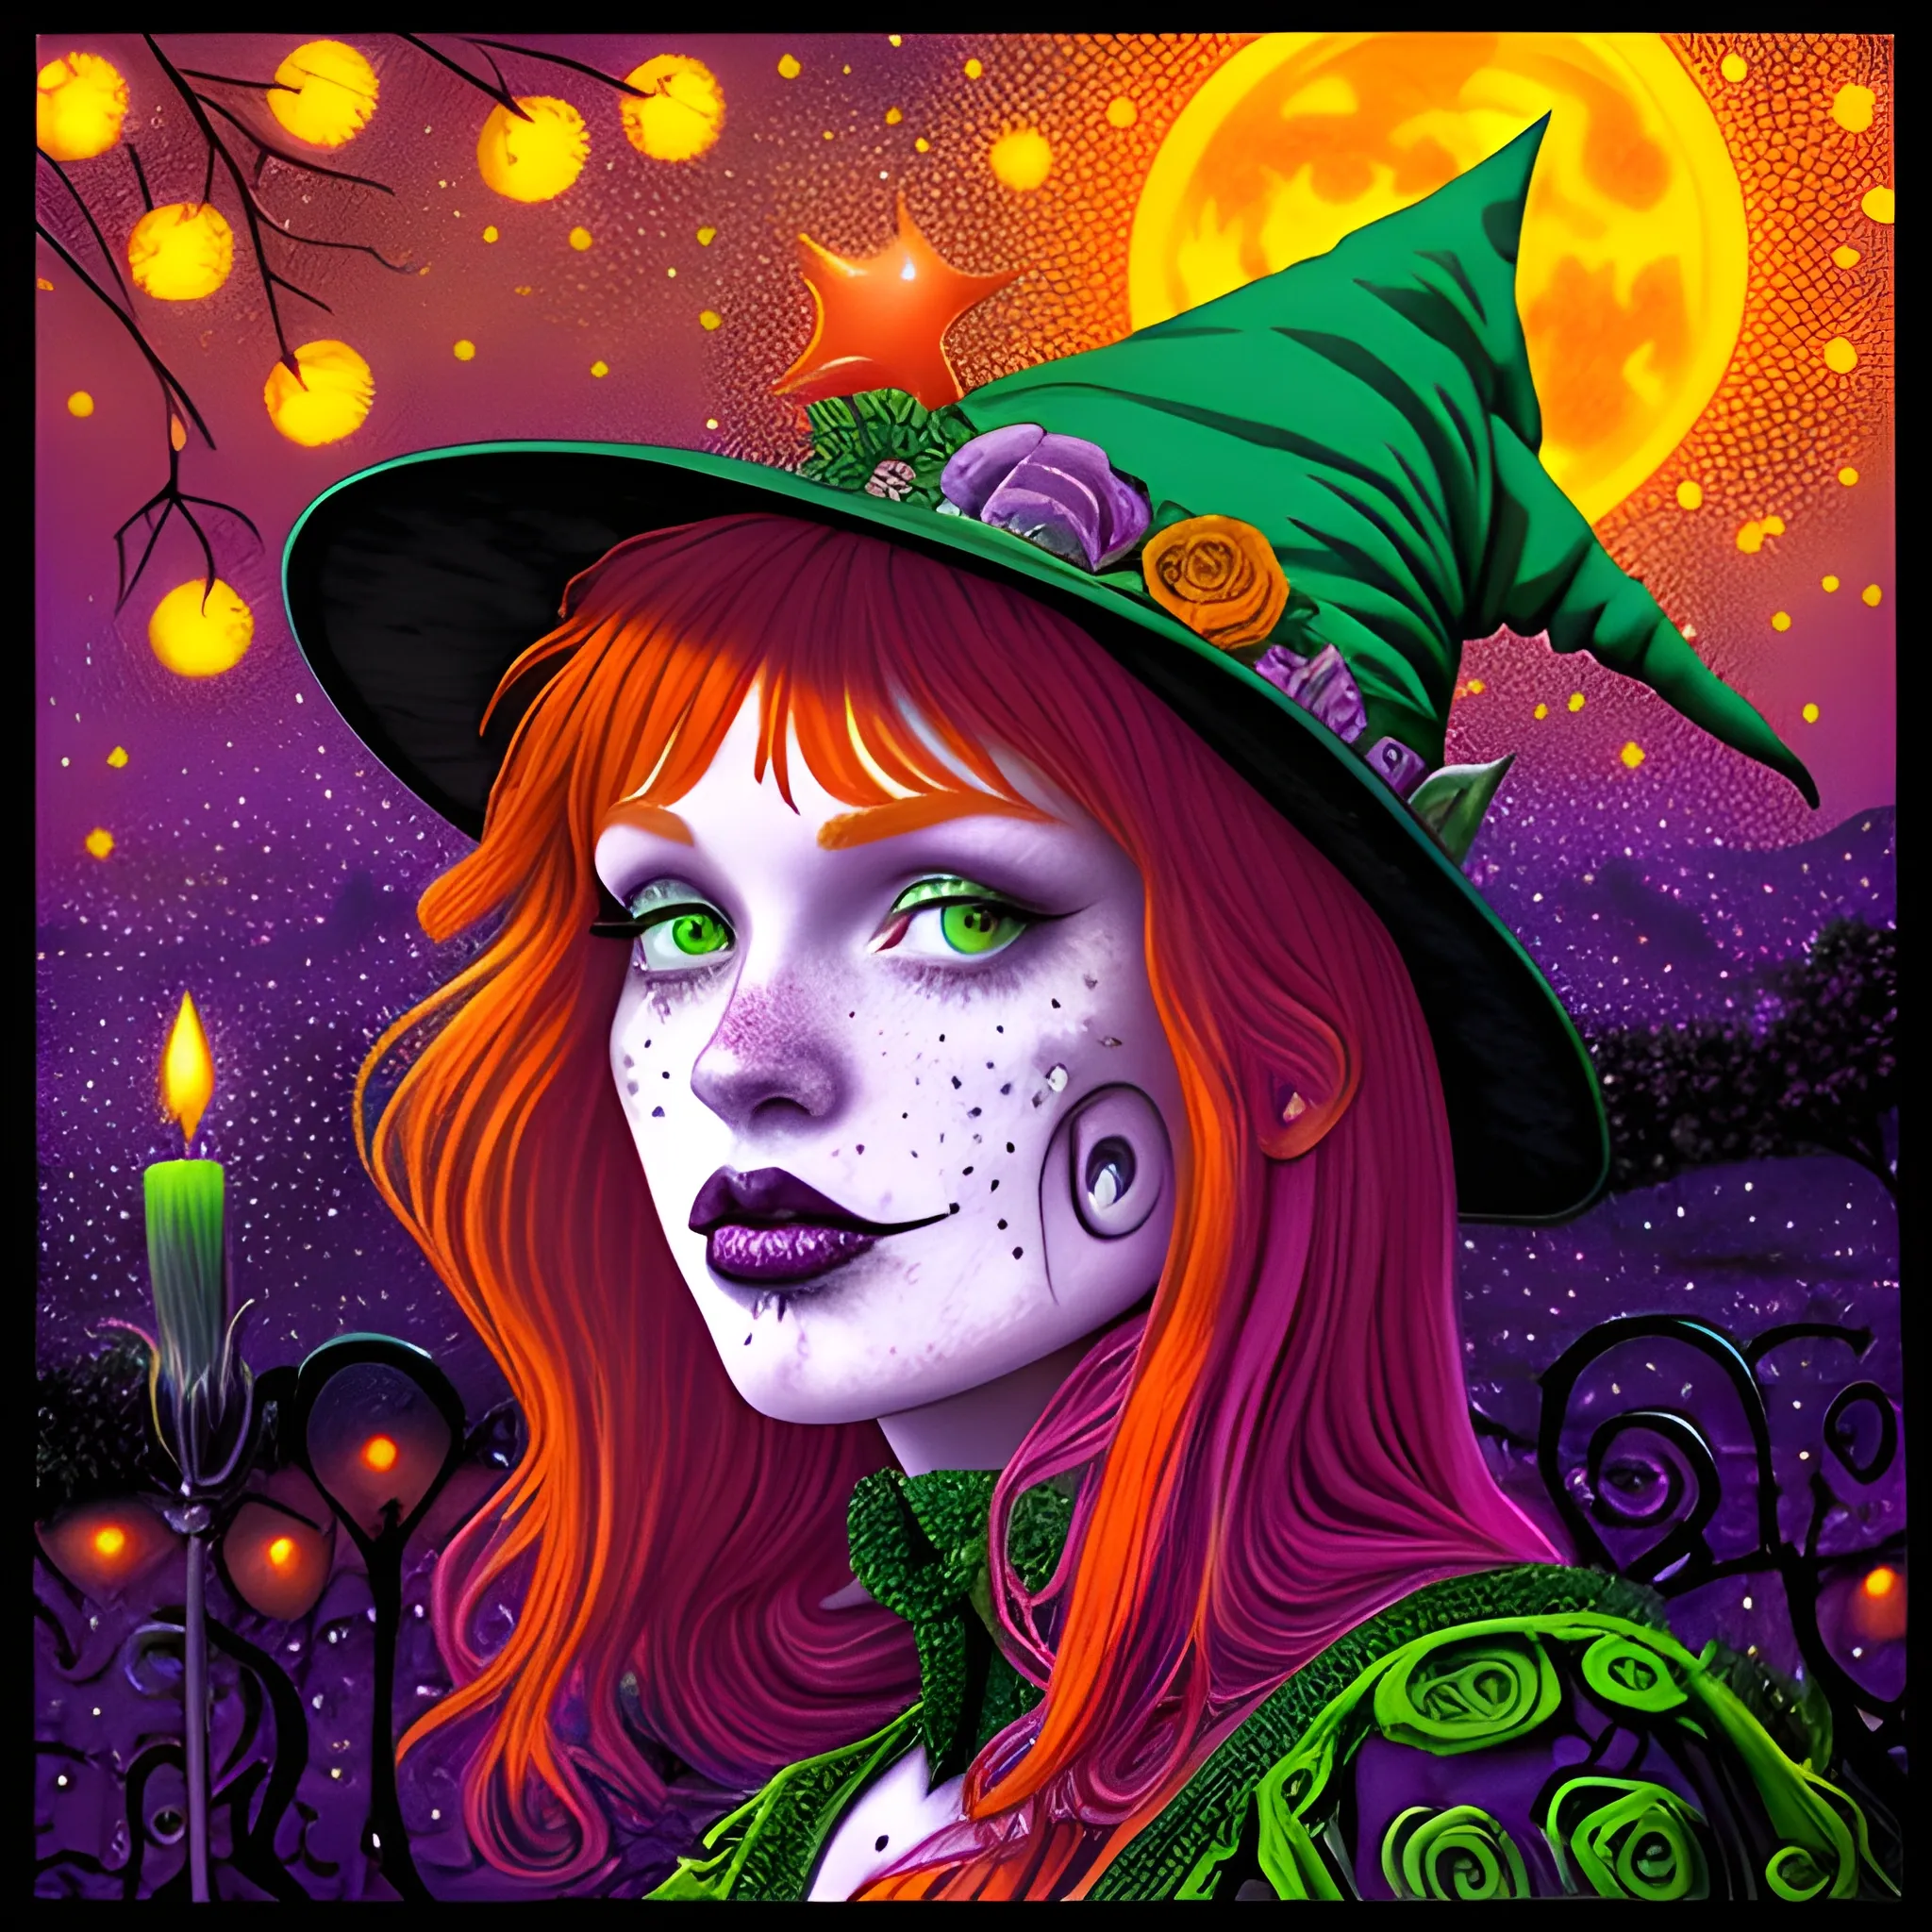 Bella Thorne / Sadie Sink face morph as a Halloween Witch, wearing a thorny witch hat adorned with thorns and black roses; Halloween, bats, full moon in a nebula sky, neon spray paint, acrylic paint, fantastical surrealist world, in the style of Stephen Gammell, extremely detailed, sick, gothic, eldritch, candles, neon grape purple, dayglo orange, chartreuse green, Halloween perfect purple pumpkins, green skulls, orange bats, magic, candles, cobweb, spider, glitter, luminous color sparkles, dayglo orange, neon grape purple, chartreuse green, hot pink, stars, sparkles, glitter, lanterns, gourds, Halloween; Goddess of the Night with a crescent moon and many stars in the style of Maxfield Parrish, starry night, James R. Eads